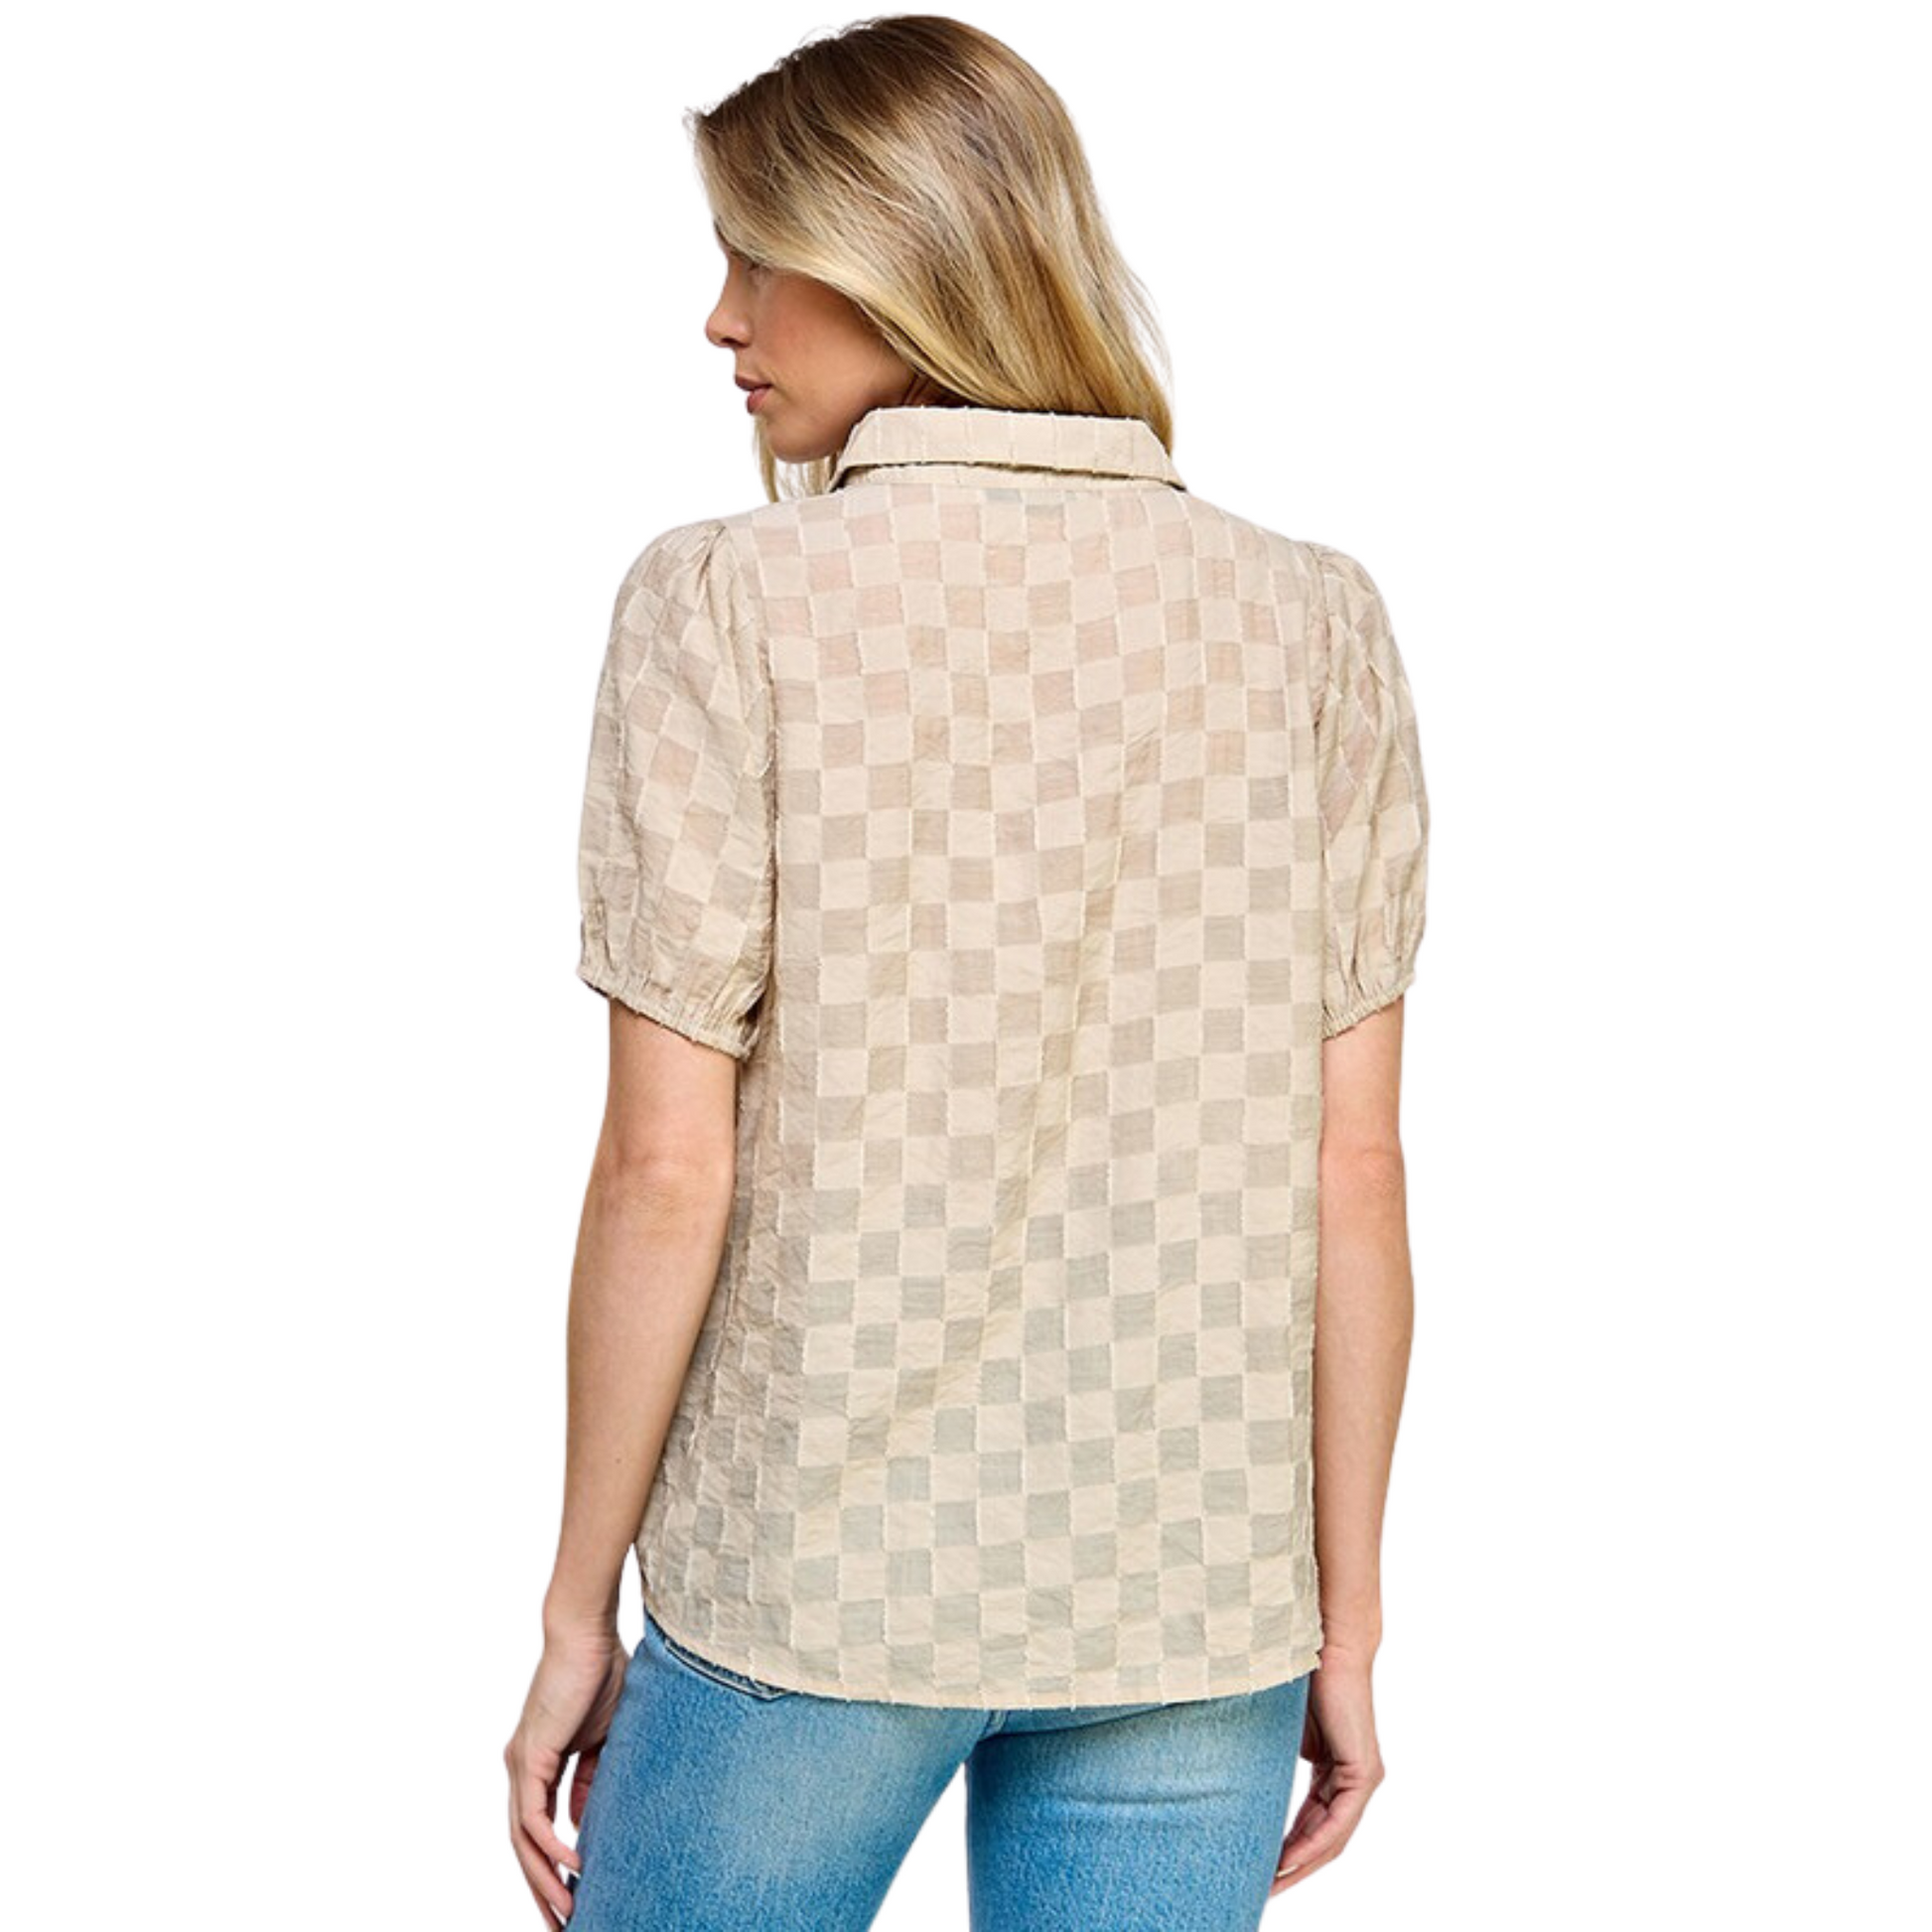 This Textured Short Sleeved Top is made of a cream-colored, textured cotton fabric, featuring a collared neckline with button up closure. Perfect for any occasion, this timeless piece offers a classic look with a touch of modern texture.